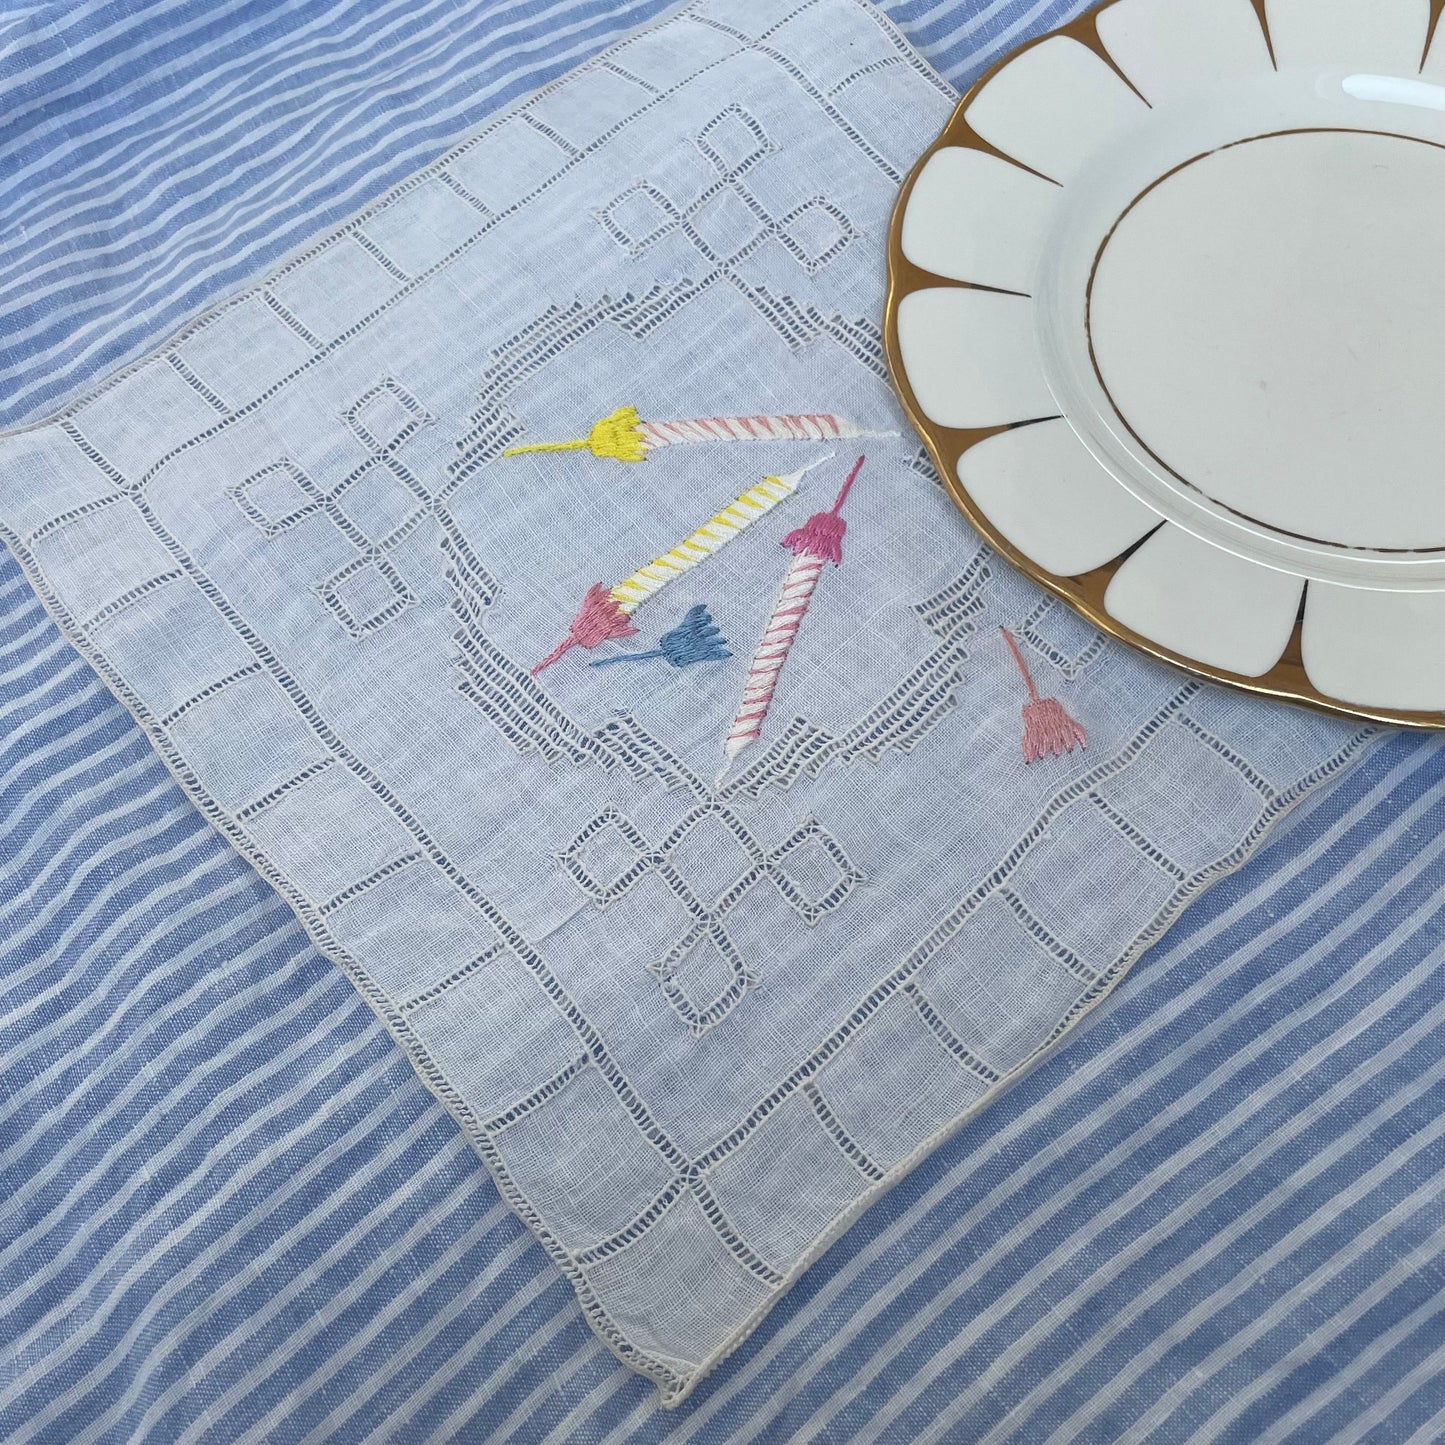 Vintage linen white cocktail napkin with embroidered birthday candles motif shown on a blue and white striped cloth with the corner of a small white and gold plate also visible